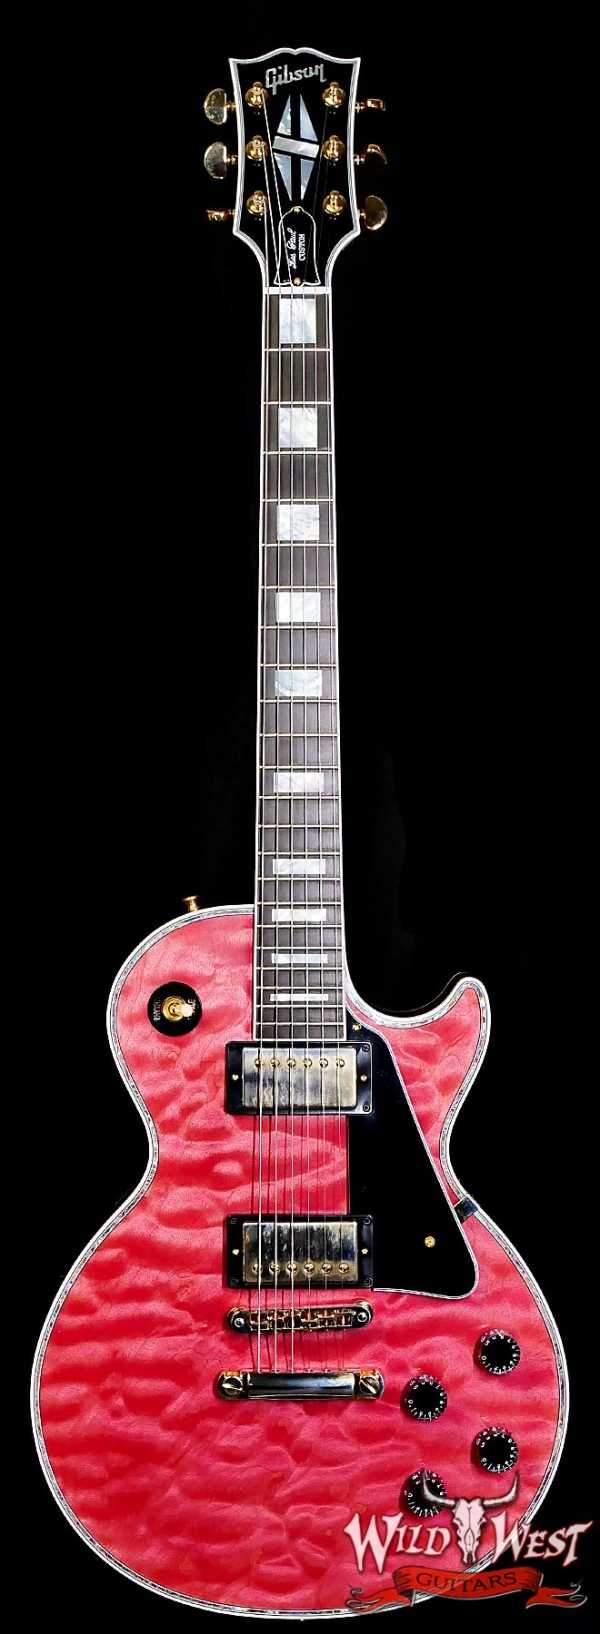 Gibson Custom Shop M2M Hand Selected 5A Quilt Maple Top Les Paul Custom Ebony Fingerboard VOS Chablis Pink 8.50 LBS